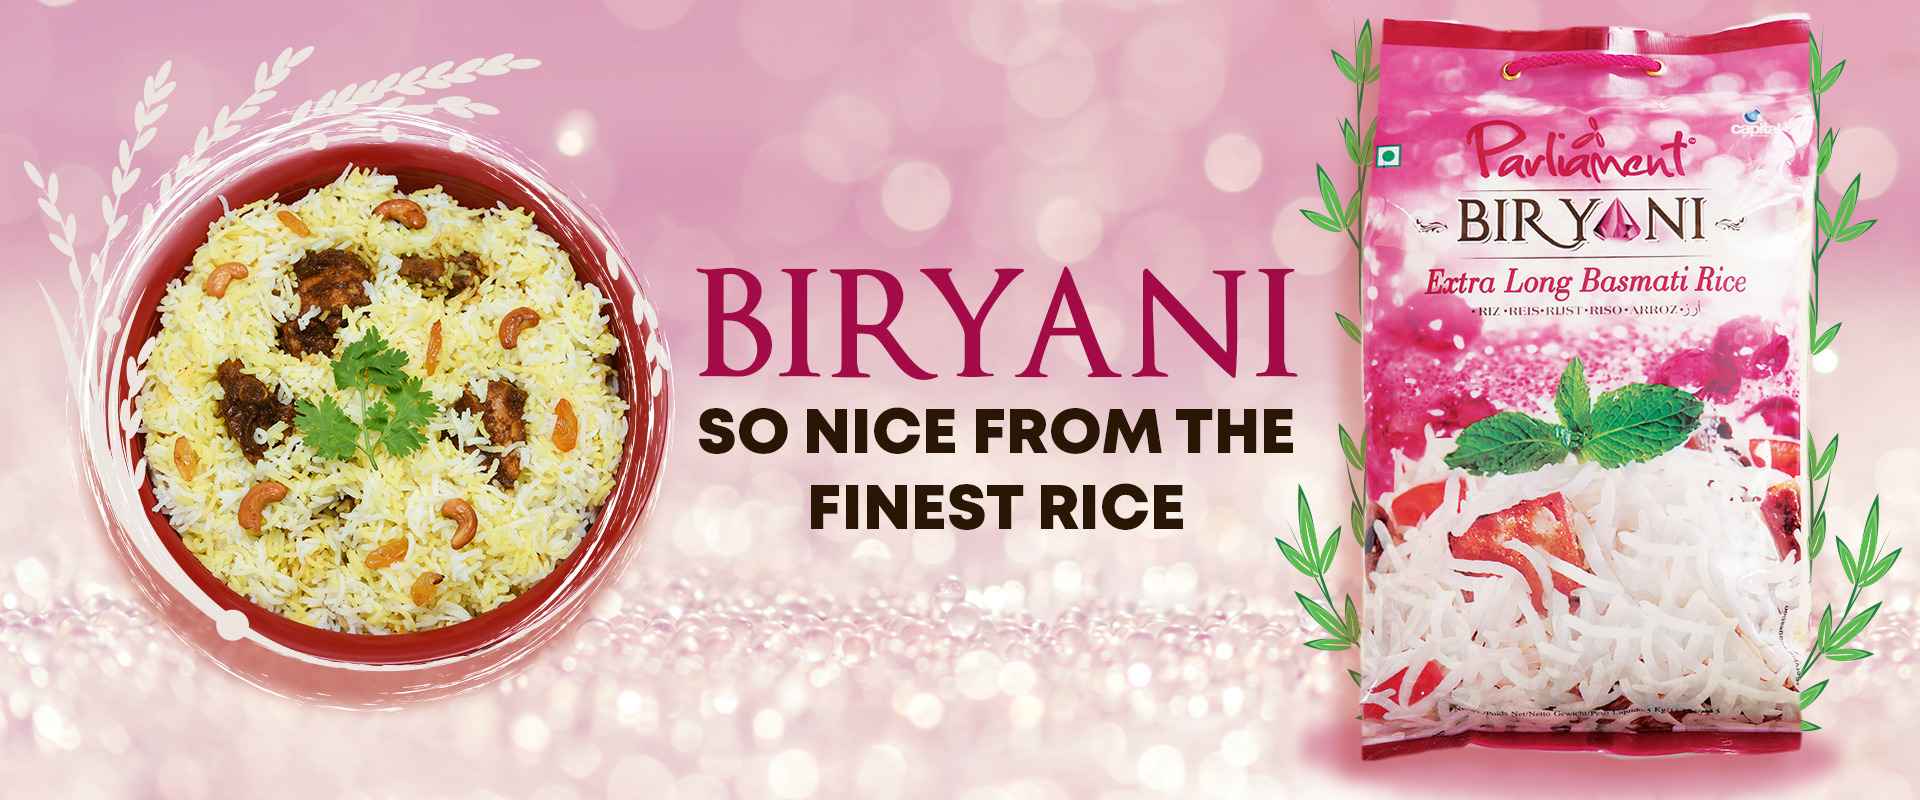 Top 10 rice brands from india:Delicious Rice and Food Pairing